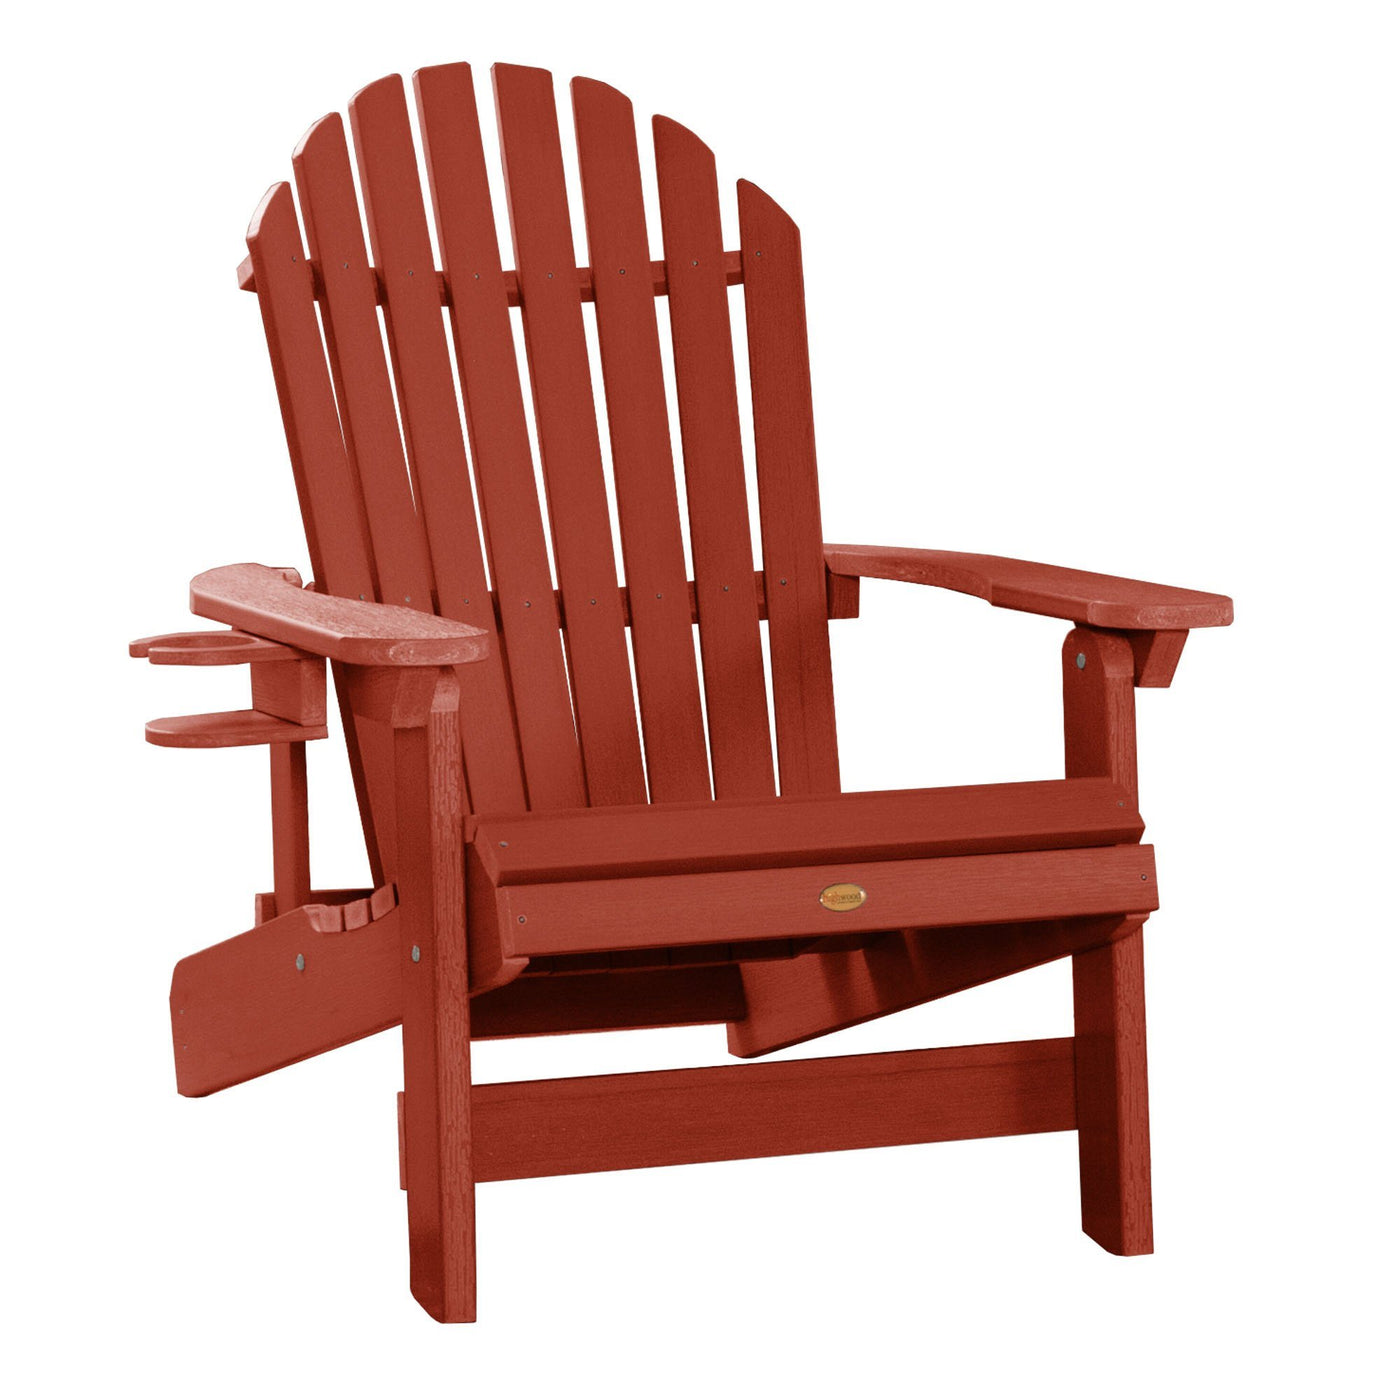 1 King Hamilton Folding and Reclining Adirondack Chair with 1 Easy-add Cup Holder Highwood USA Rustic Red 